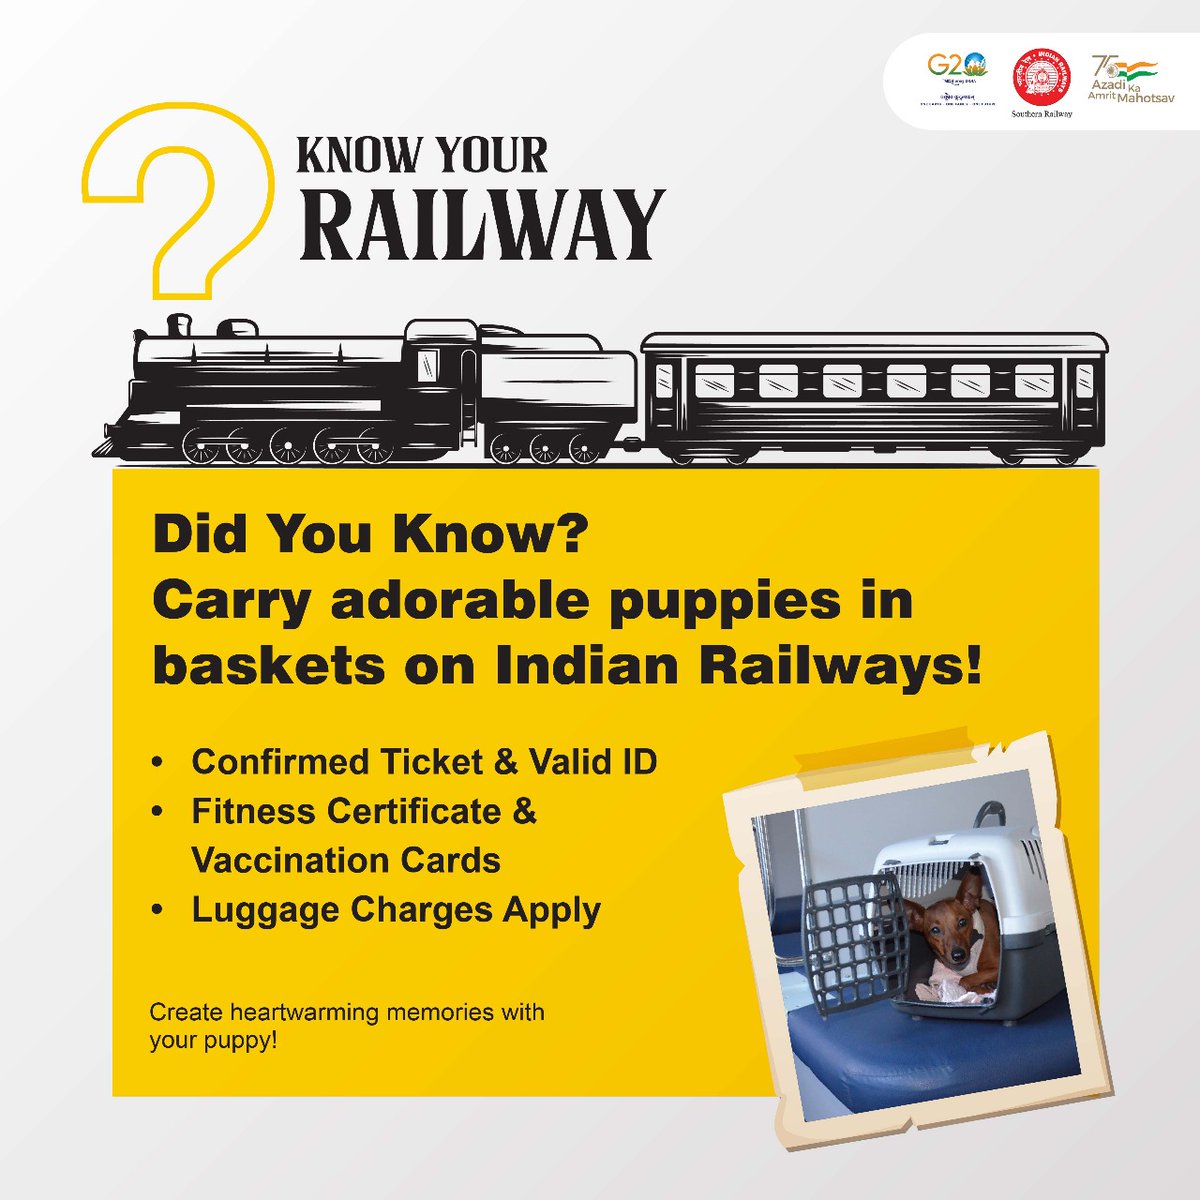 Your Furry Friend Can Now Travel With You on #IndianRailways!

Say goodbye to separation anxiety & hello to #pawsome adventures! Did you know your adorable puppies can now join you on your Indian Railways journey?

#PetFriendlyTravel #DogDays #TravelWithPets  #Southernrailway